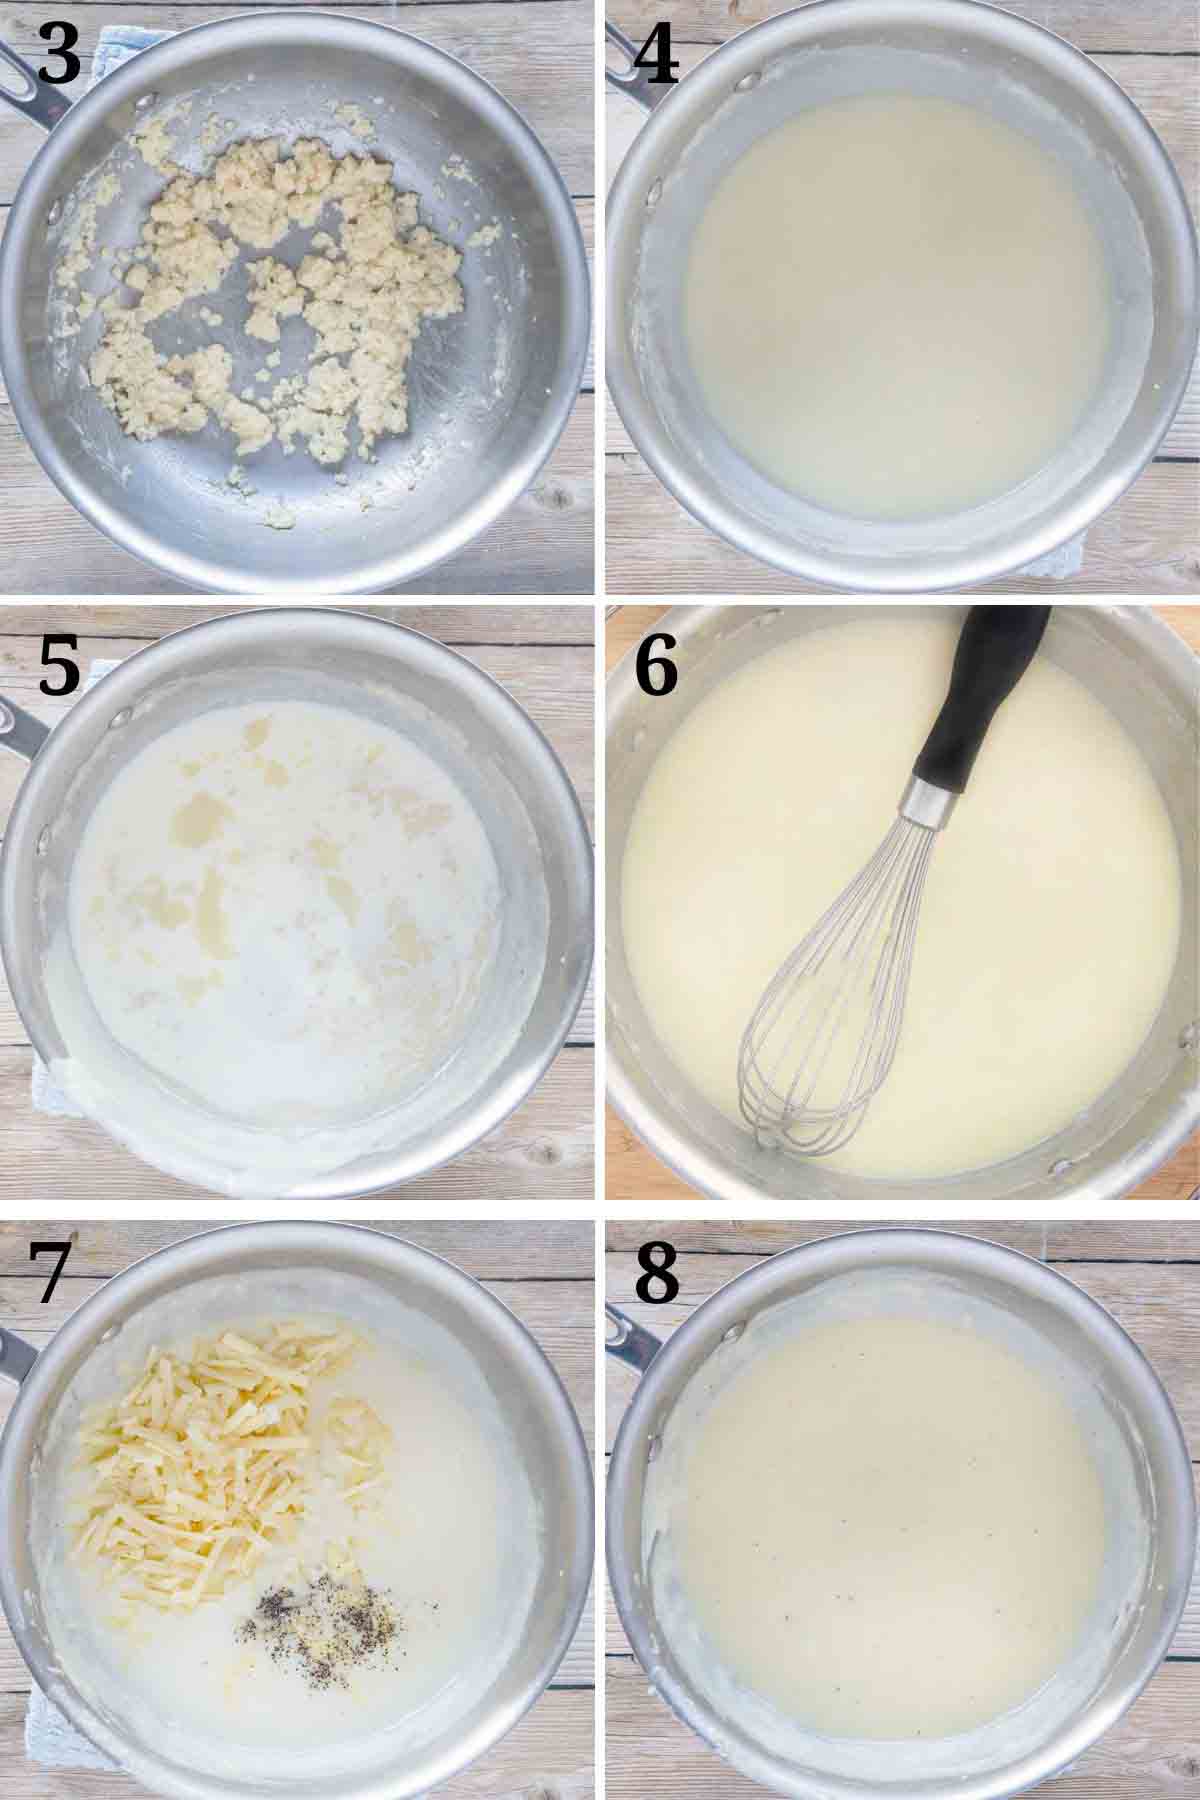 six images showing how to make béchamel sauce and a mornay sauce